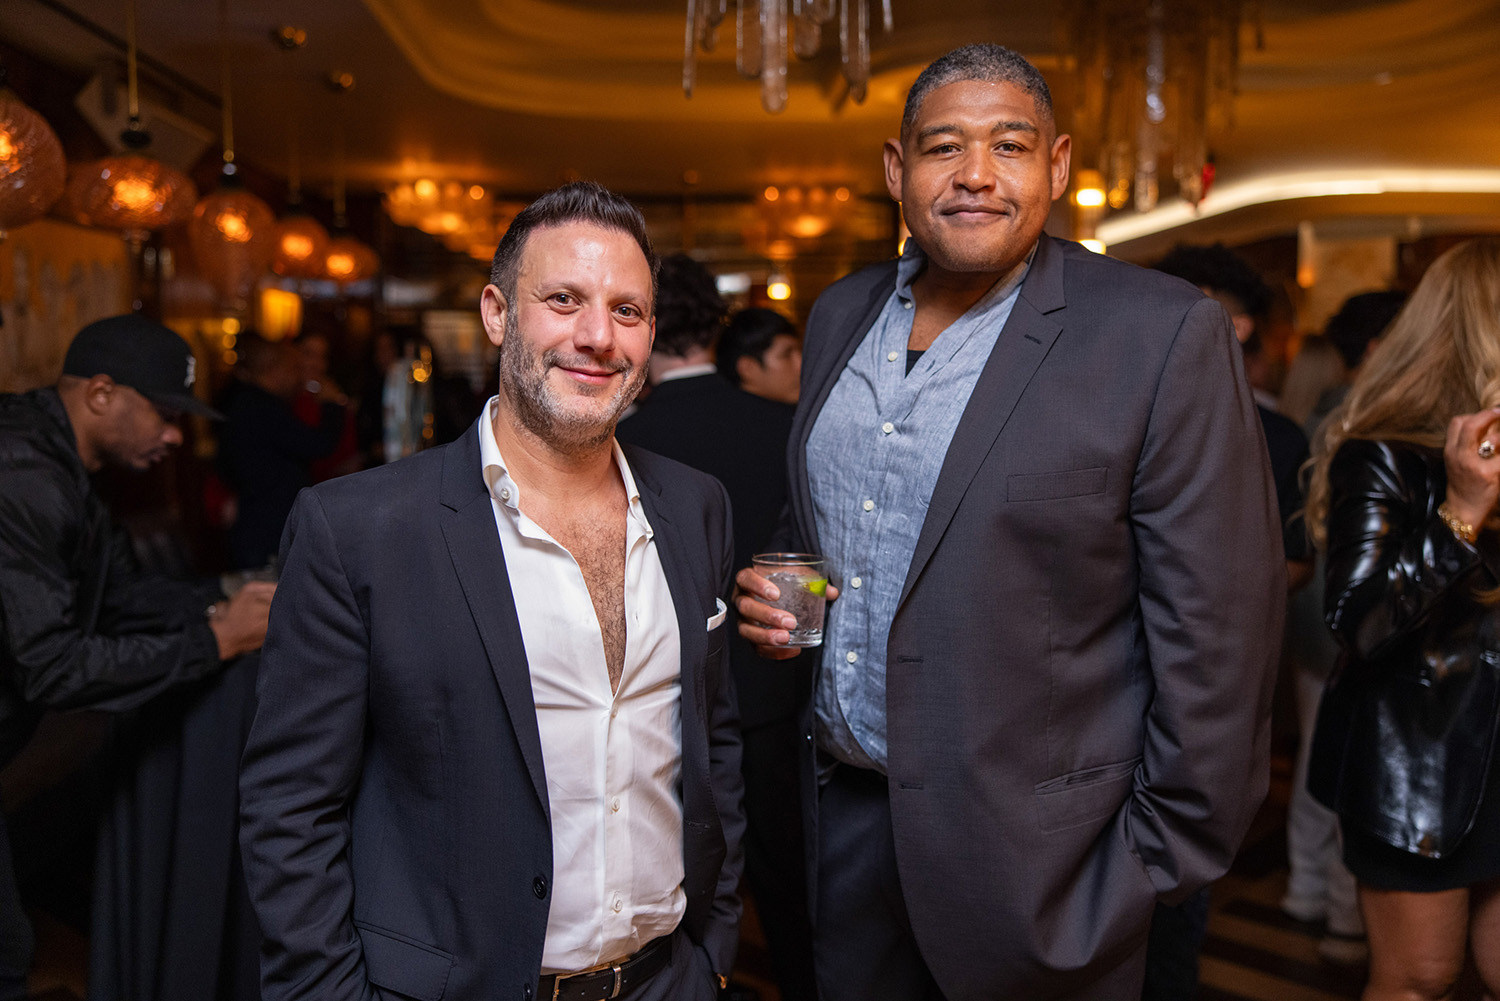 Brian Toll & Omar Benson Miller at the Grand Opening Event of Delilah Miami in Florida